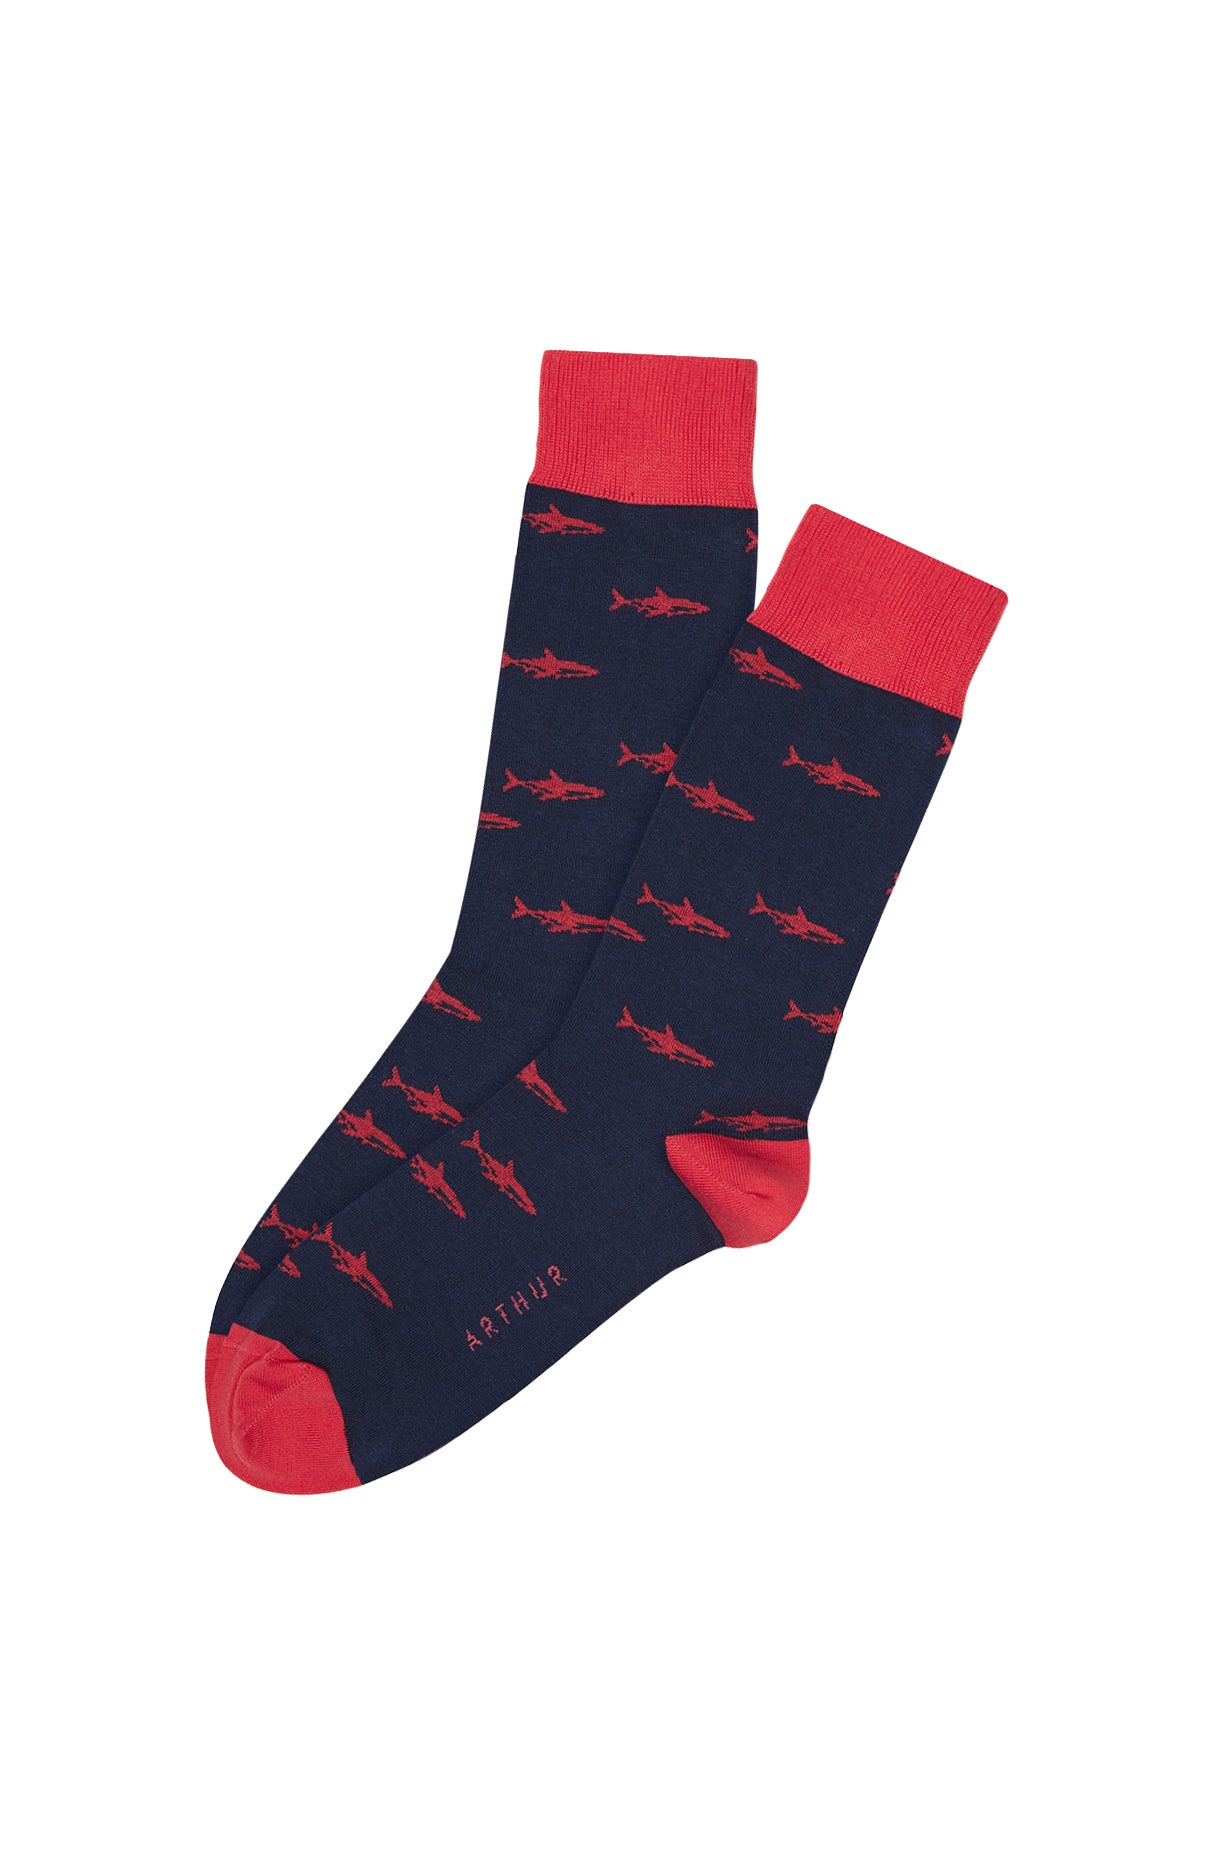 Chaussettes Requin Marine